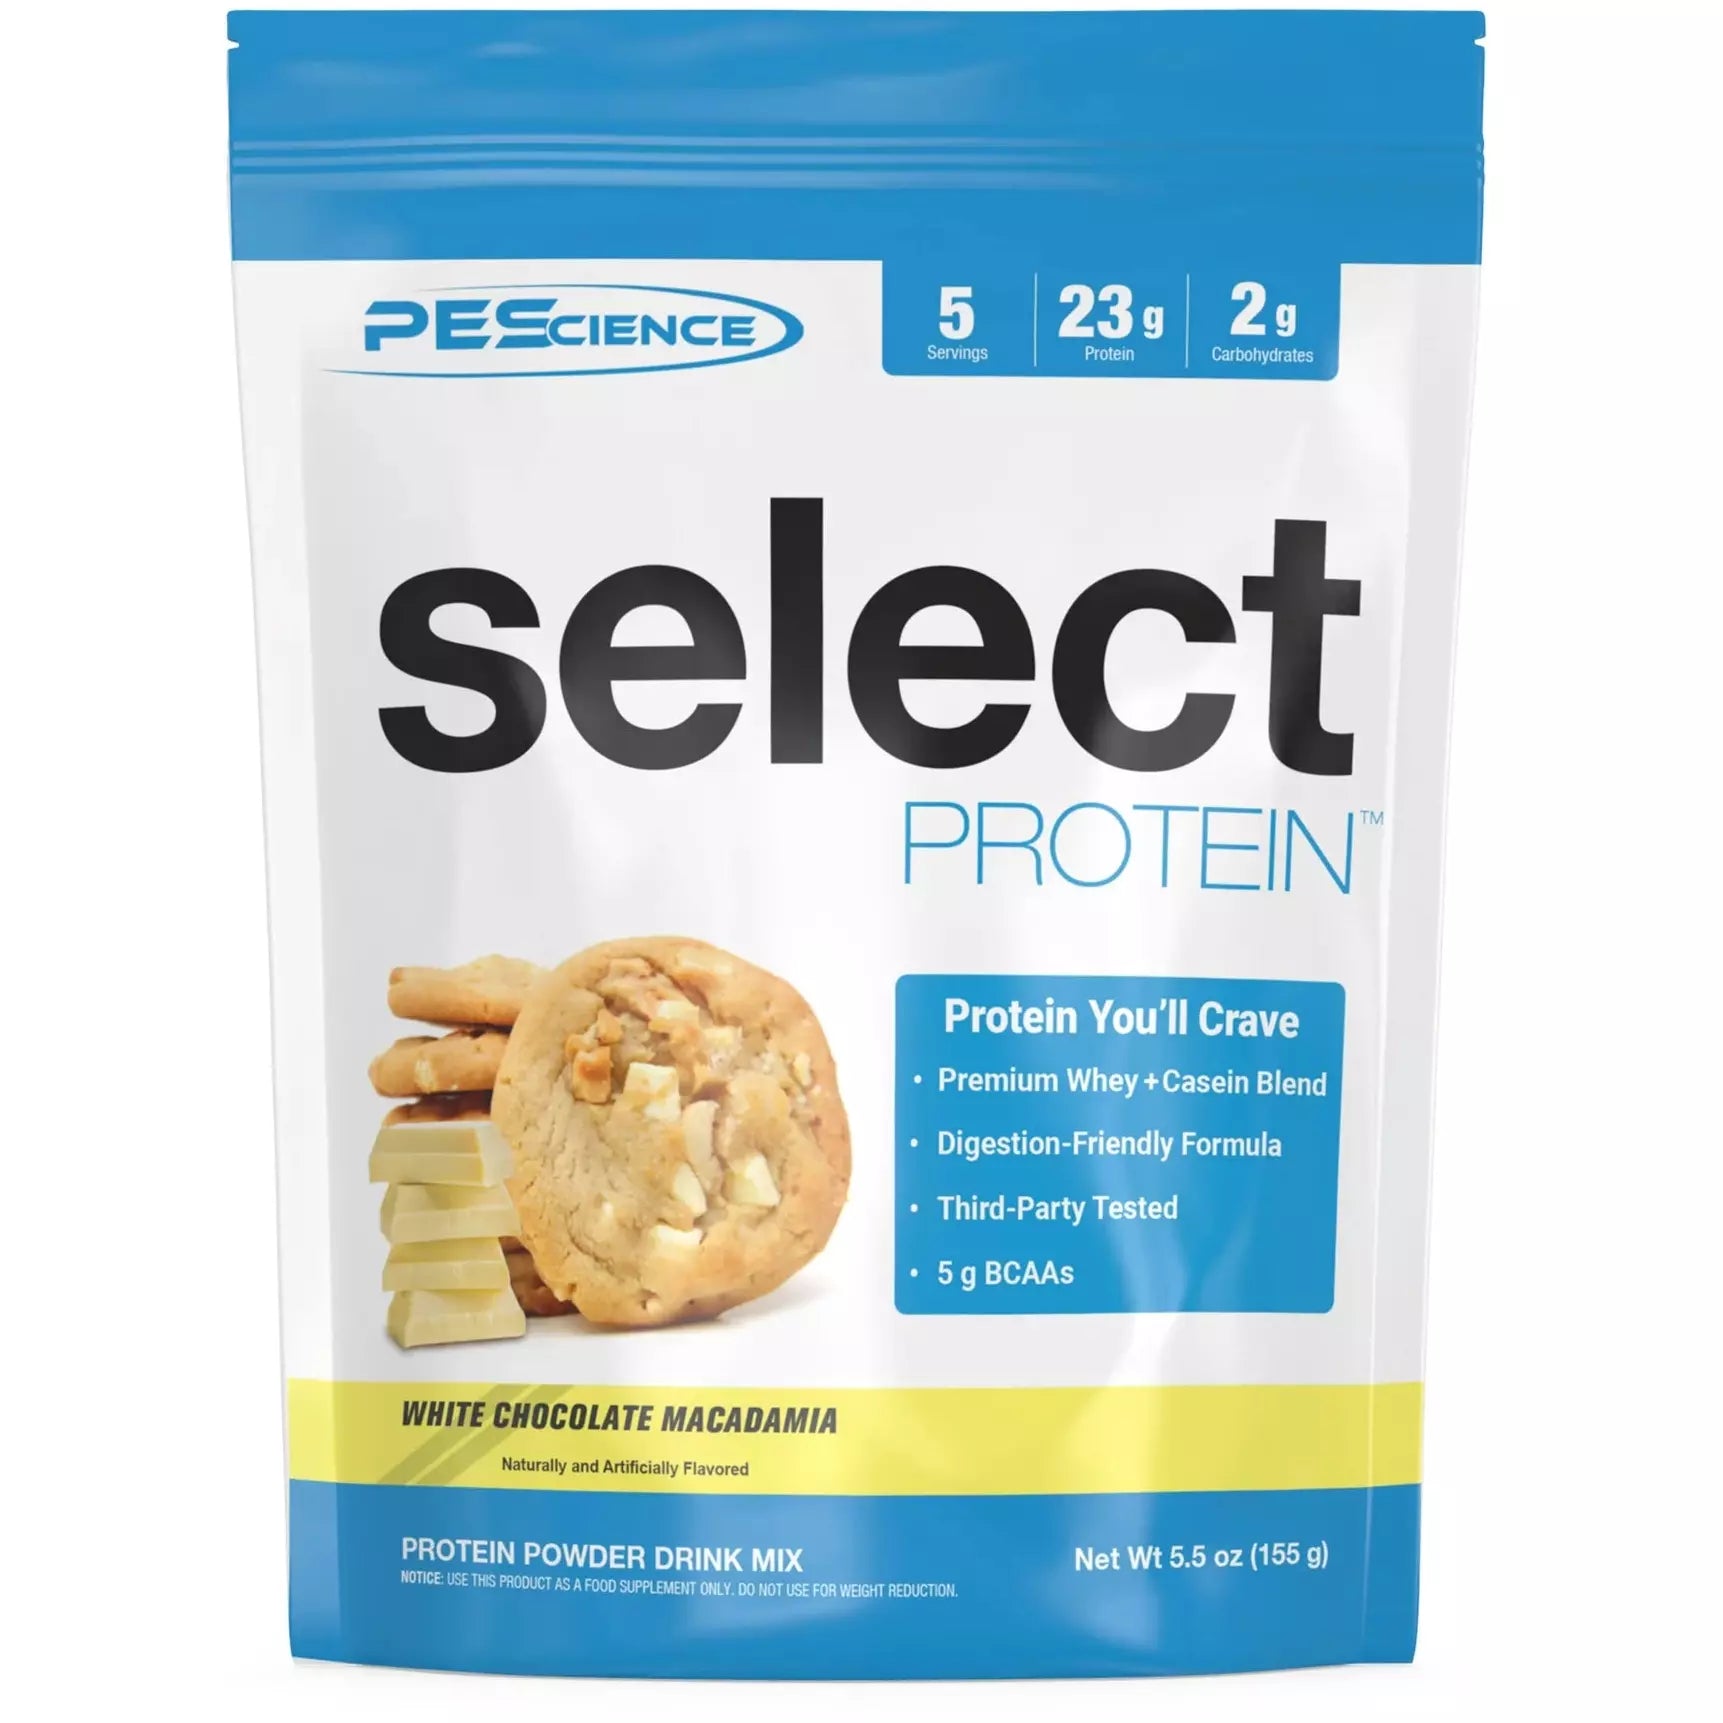 PEScience Select Protein TRIAL SIZE (5 servings) pescience-select-protein-trial-size-5-servings Whey Protein White Chocolate Macadamia PEScience